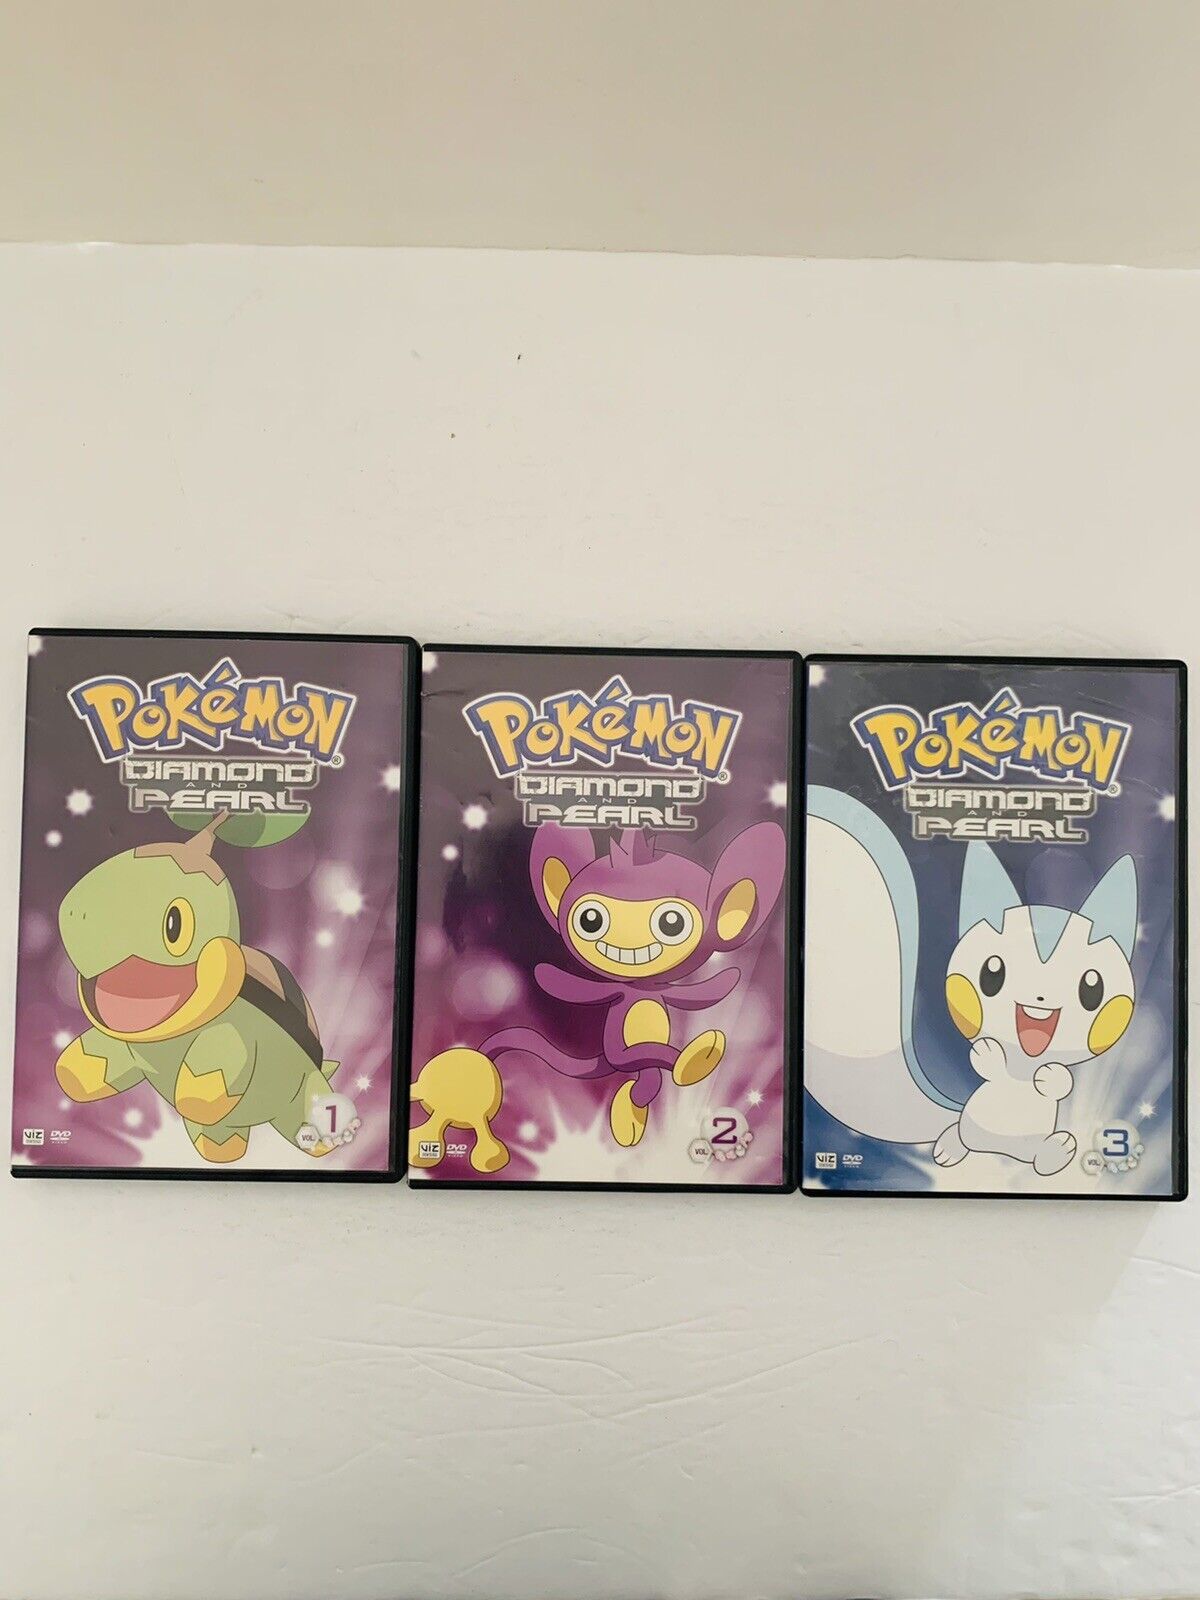 Primary image for Pokémon Diamond and Pearl Vol. 1, 2, 3 Set of 3 DVDs